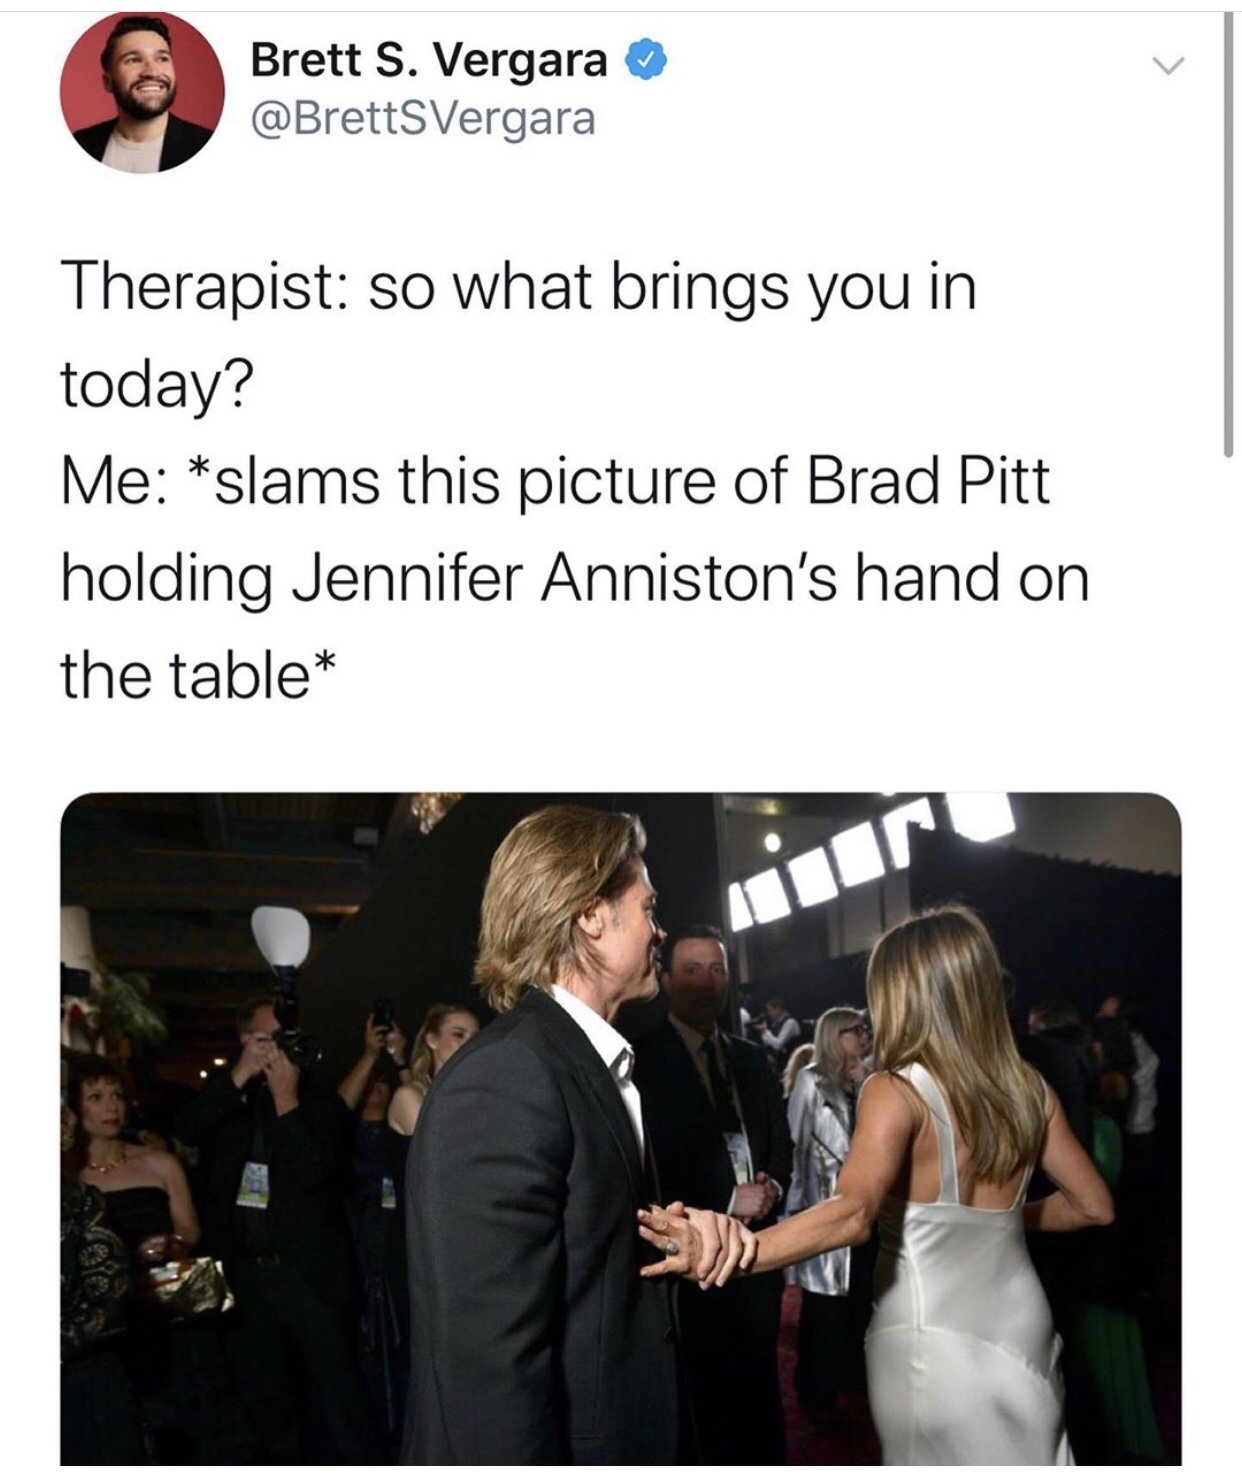 brad pitt and jennifer aniston - Brett S. Vergara Therapist so what brings you in today? Me slams this picture of Brad Pitt holding Jennifer Anniston's hand on the table